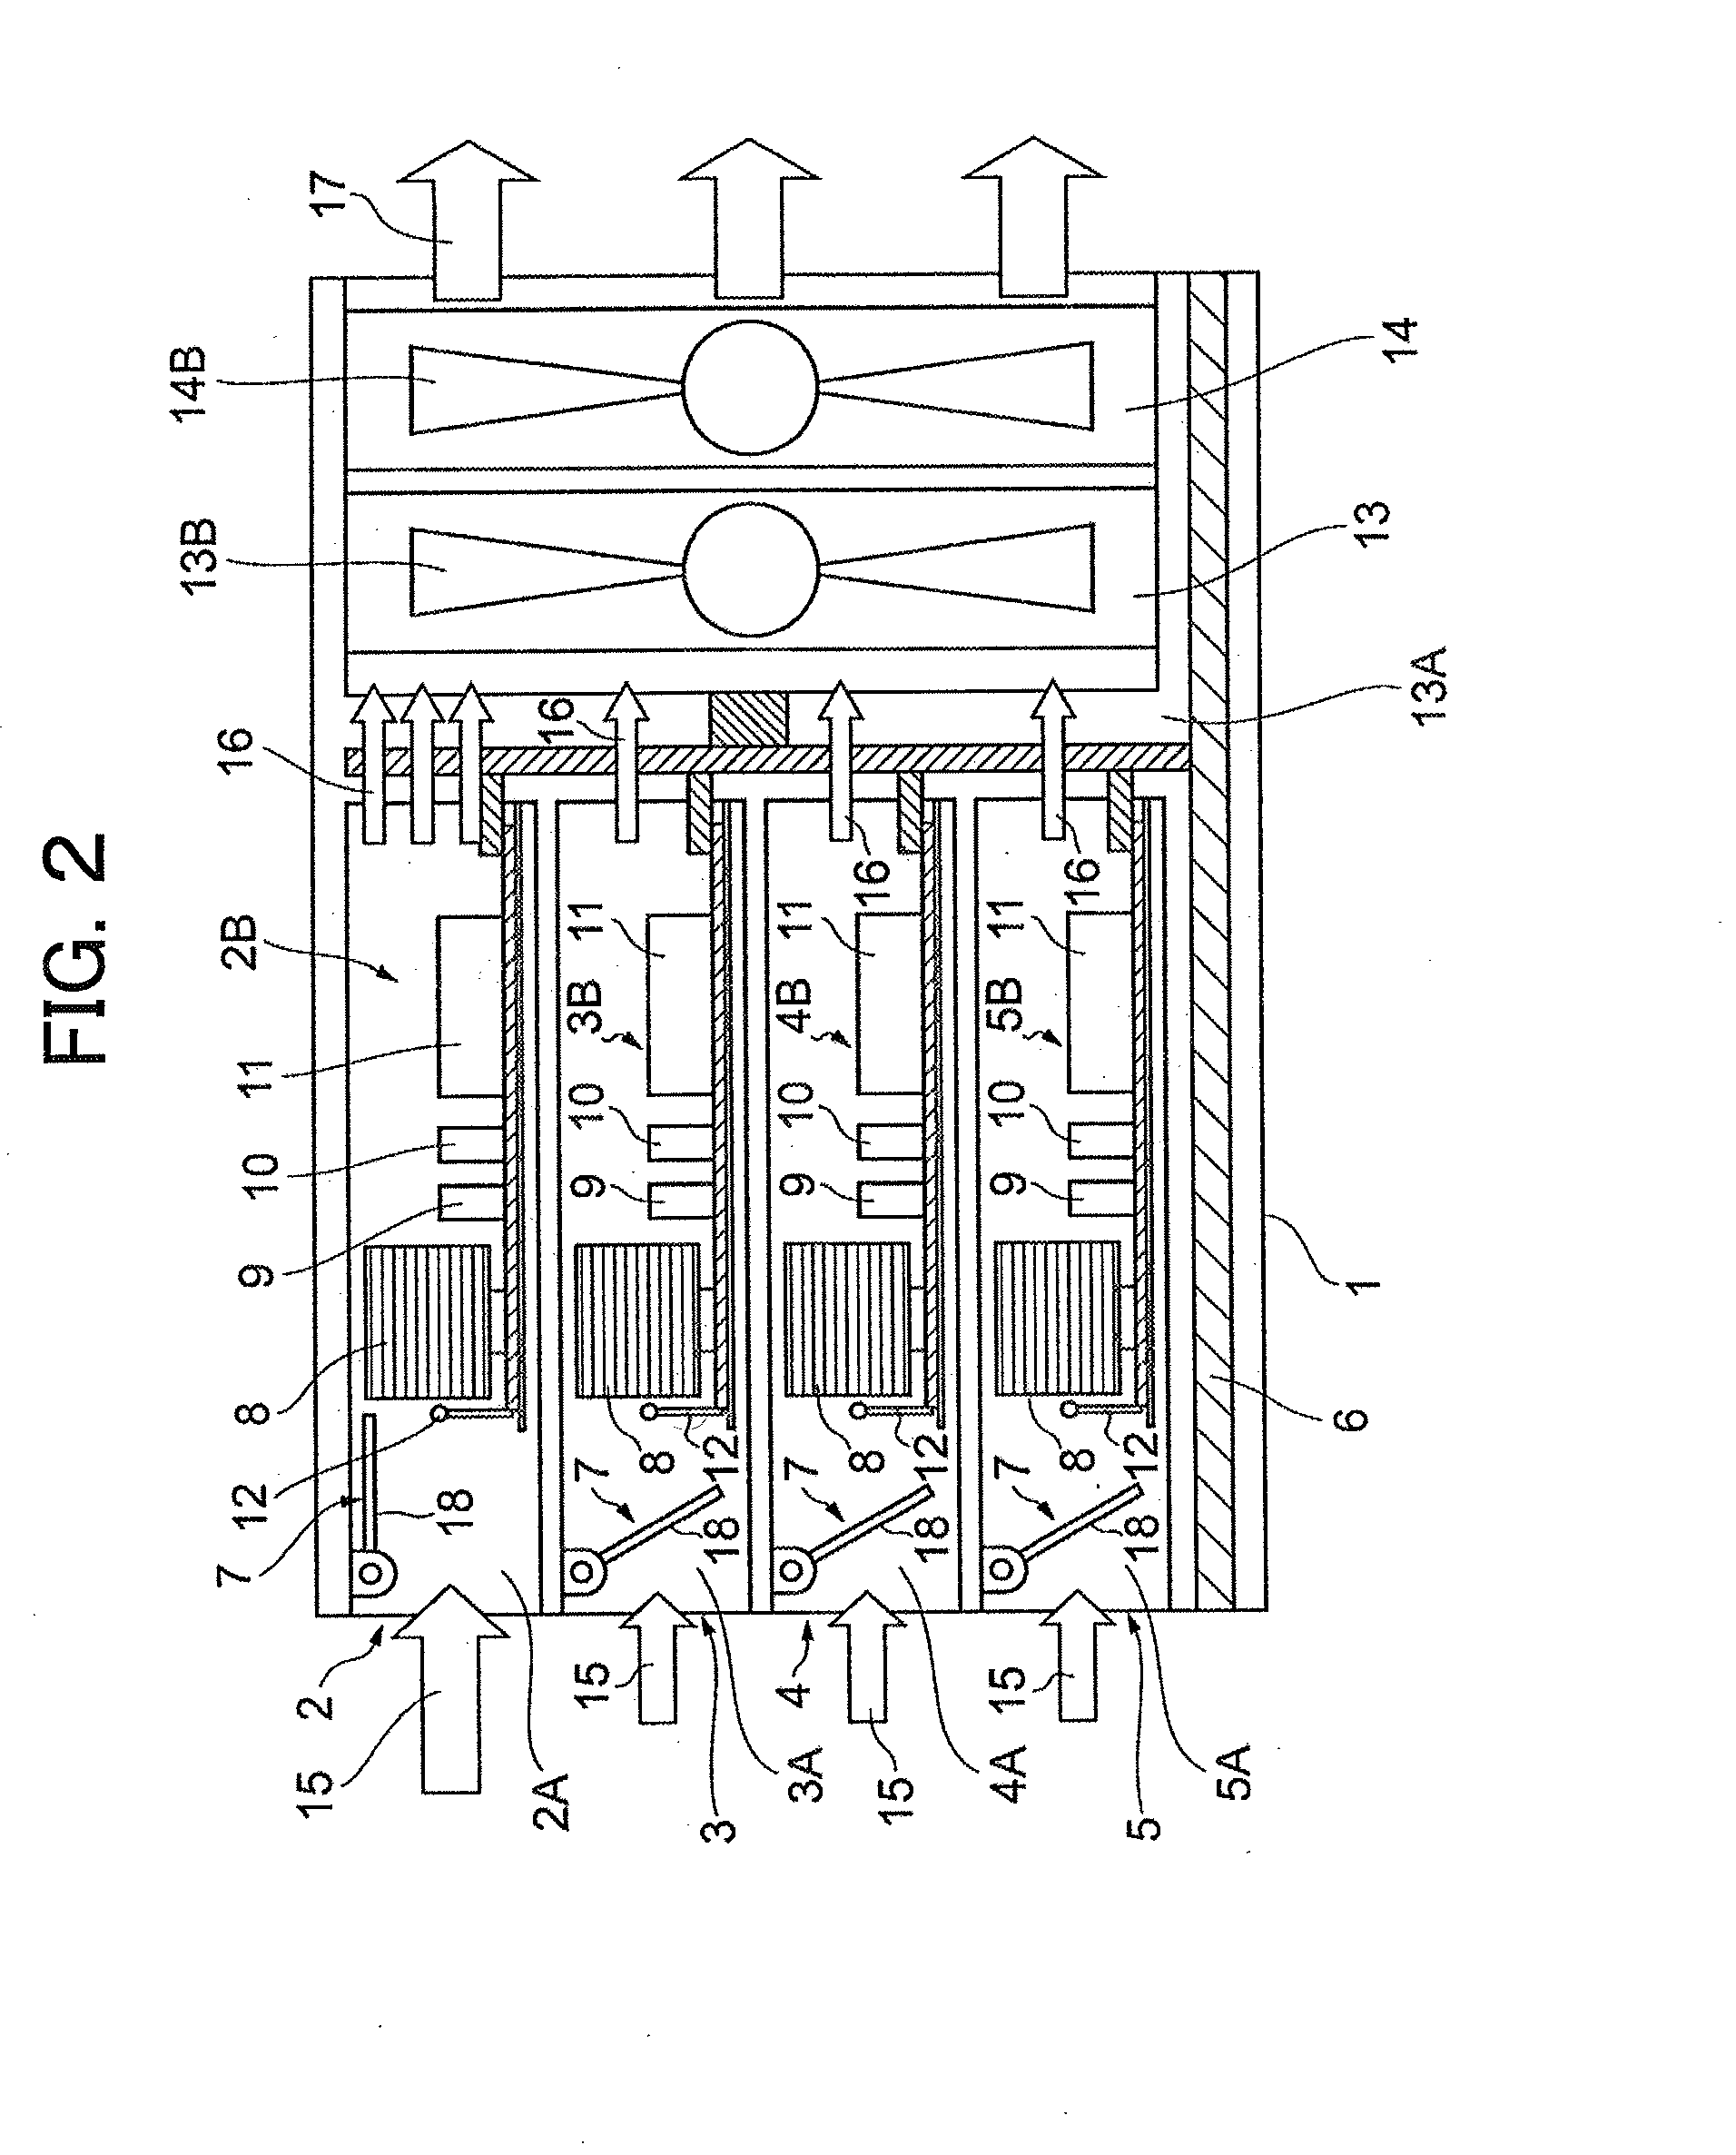 Cooling system for electronic device